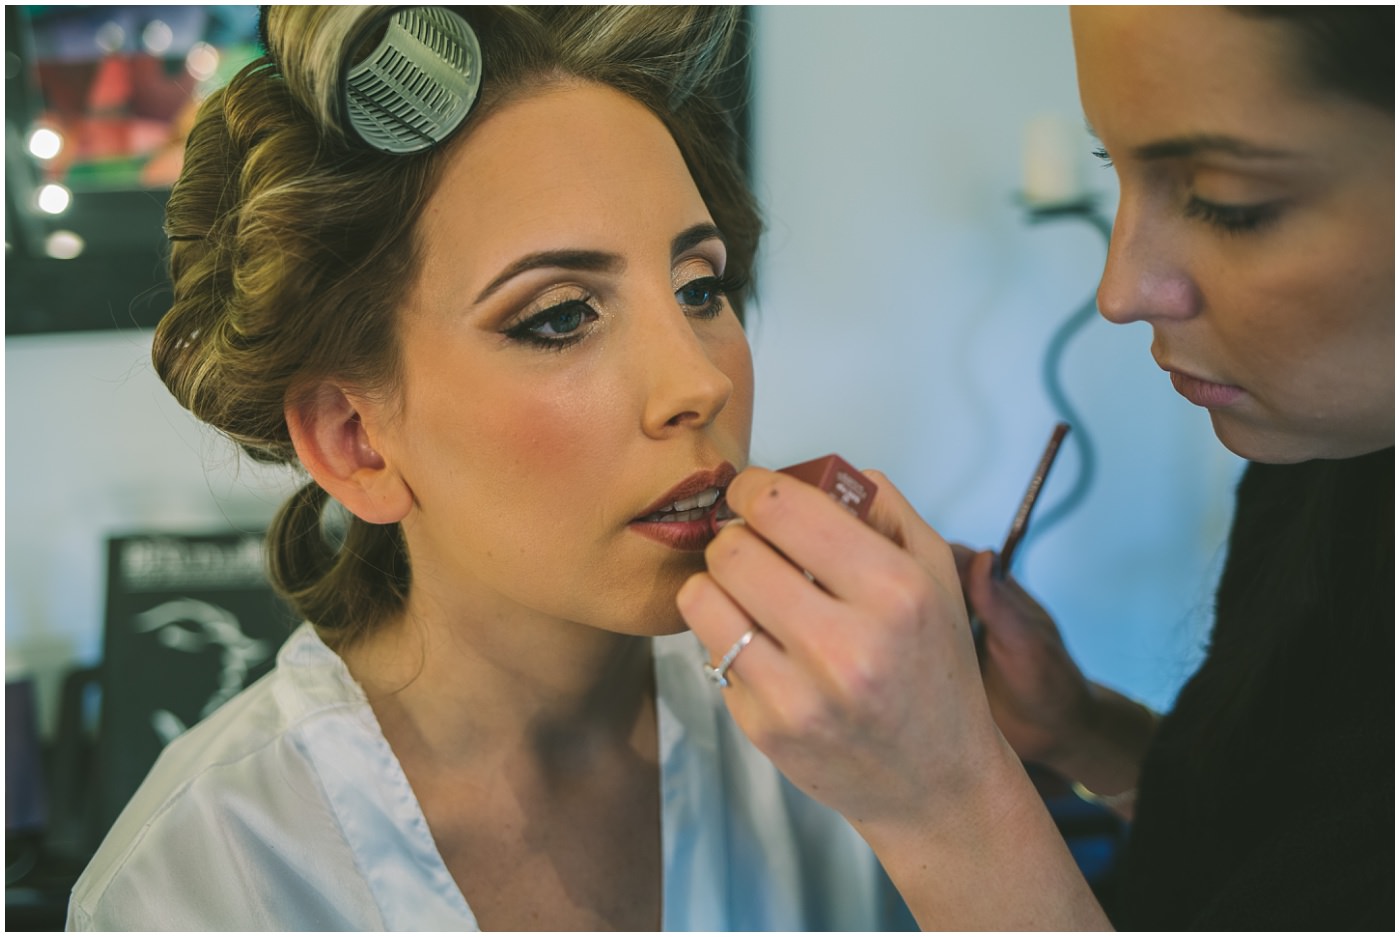 Lipstick being applied for bride